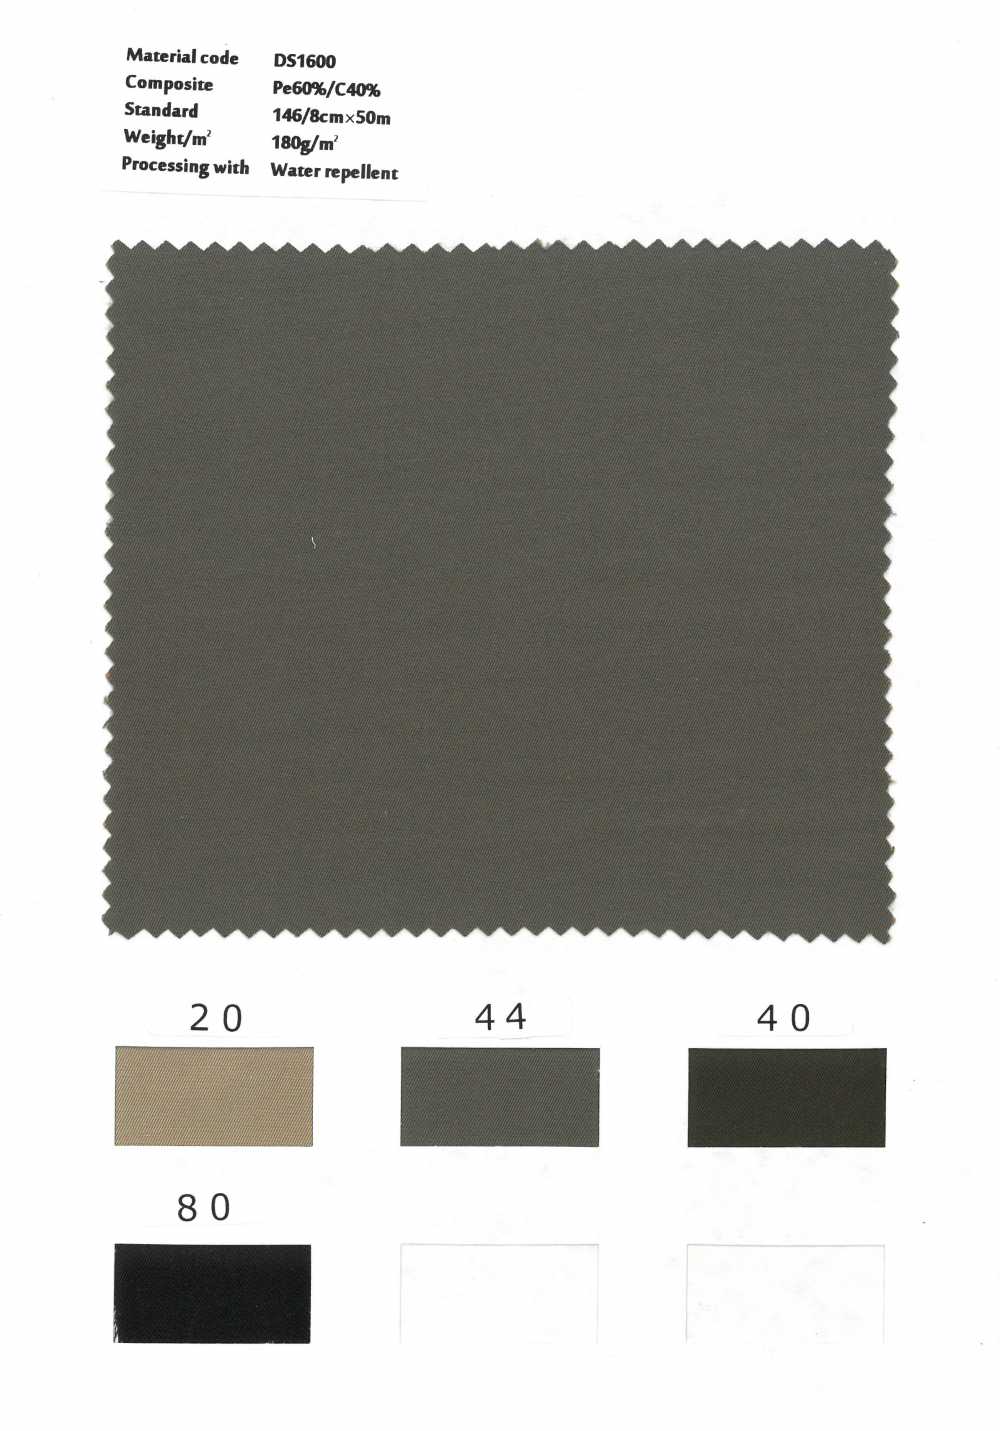 DS1600 Polyester Cotton Yarn Dyed Gabardine Water Repellent Finish[Textile / Fabric] Styletex